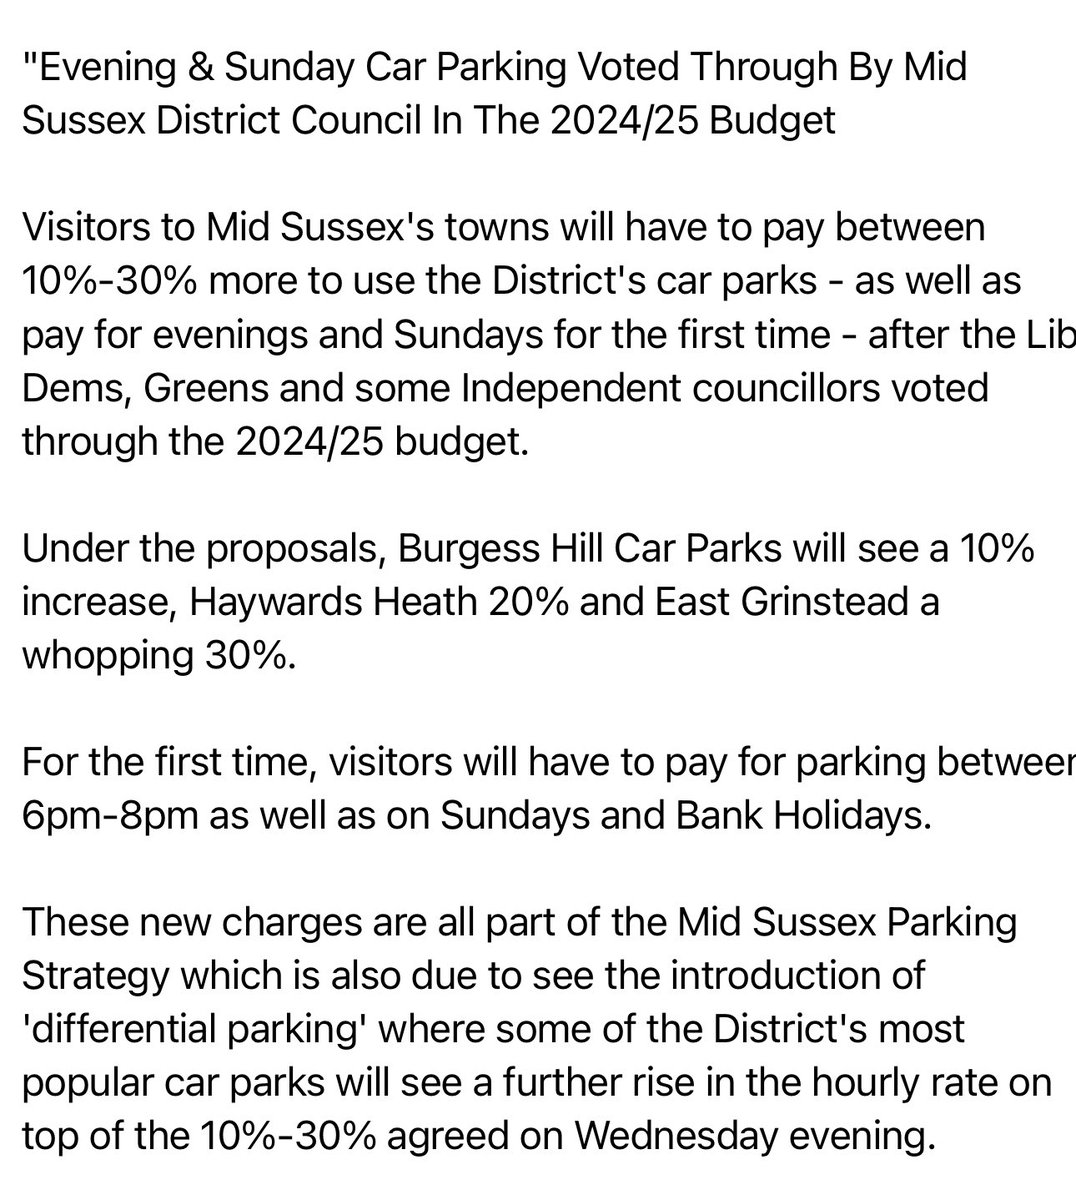 Coming to a town near you? Seems @LibDems and @TheGreenParty are trying to make it harder for shops to survive. Visitors to Mid Sussex's towns will have to pay between 10%-30% more to use the District's car parks - as well as pay for evenings and Sundays. #MidSussex @AboutEG